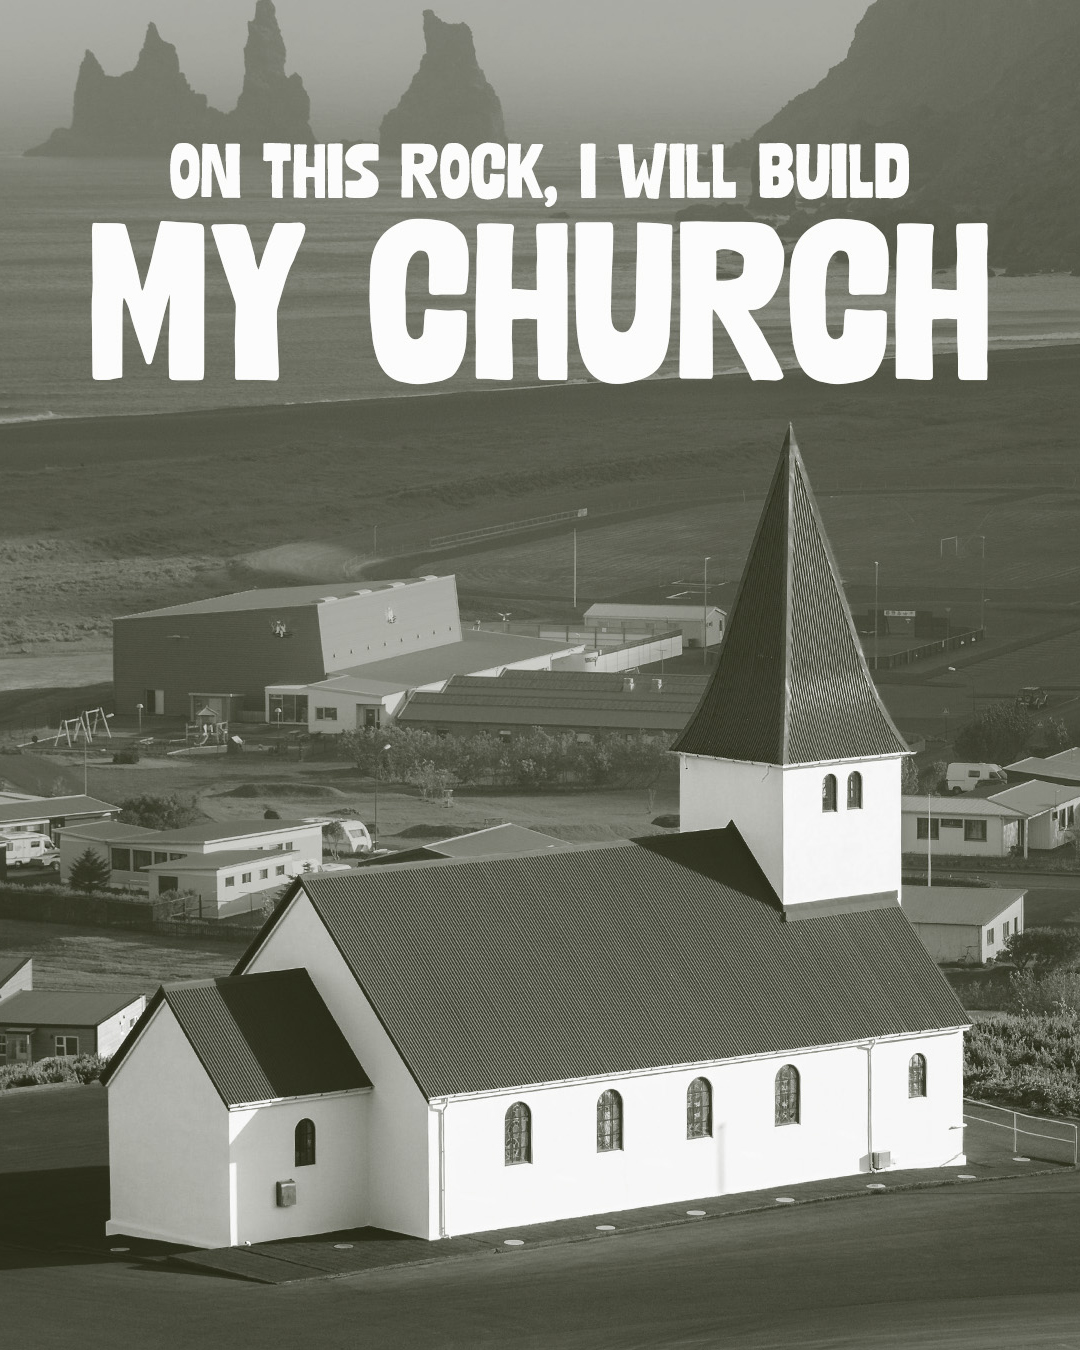 On this rock, I will build my church